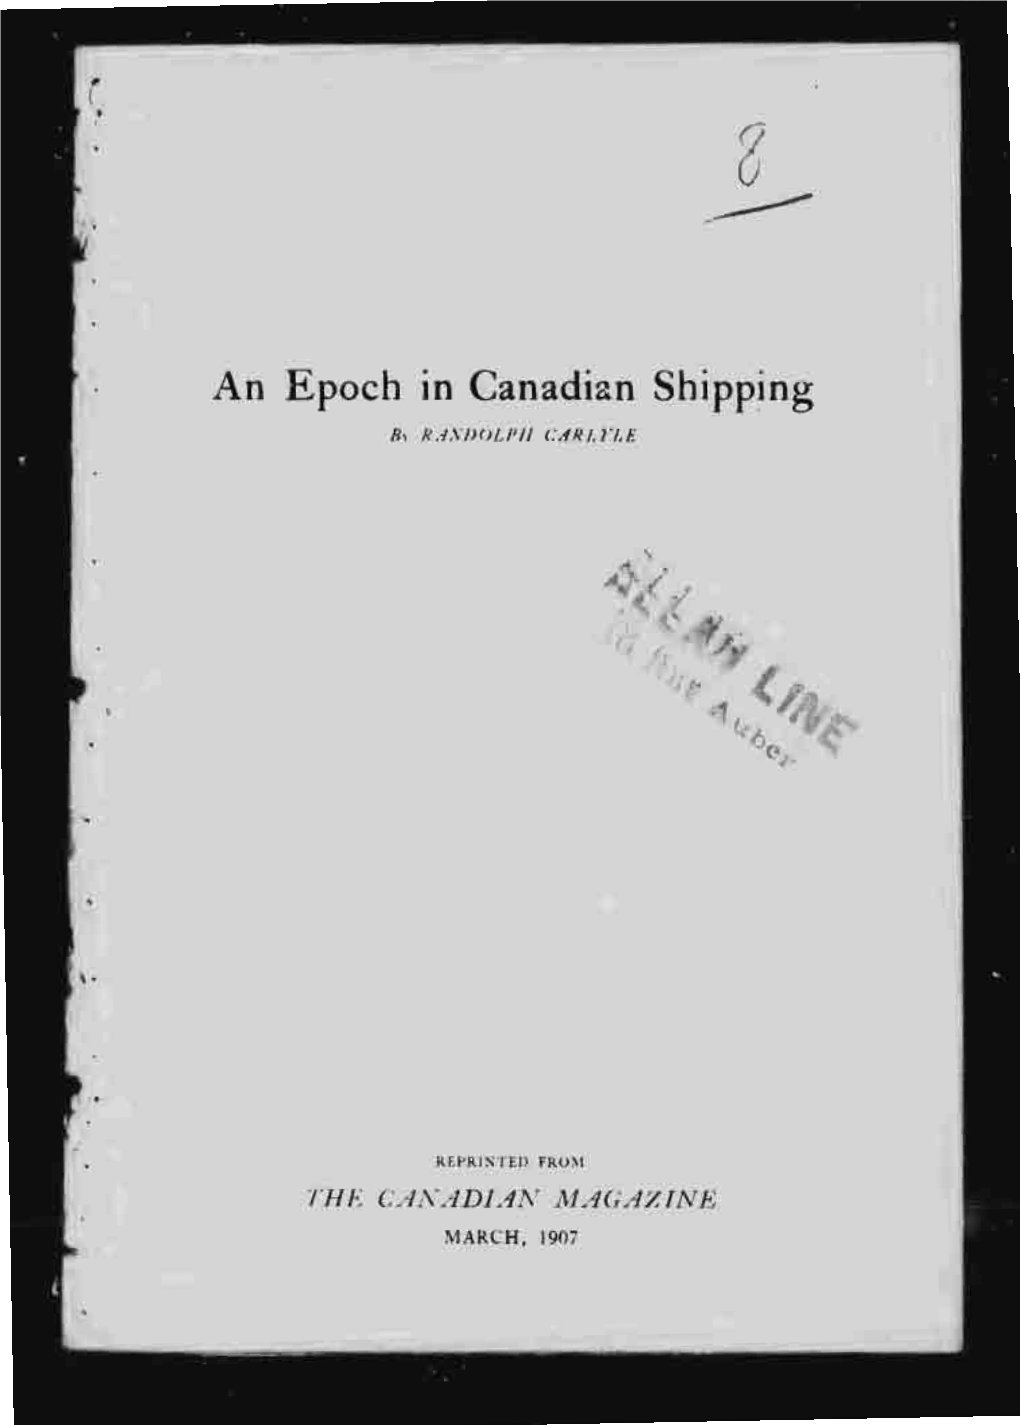 An Epoch in Canadian Shipping